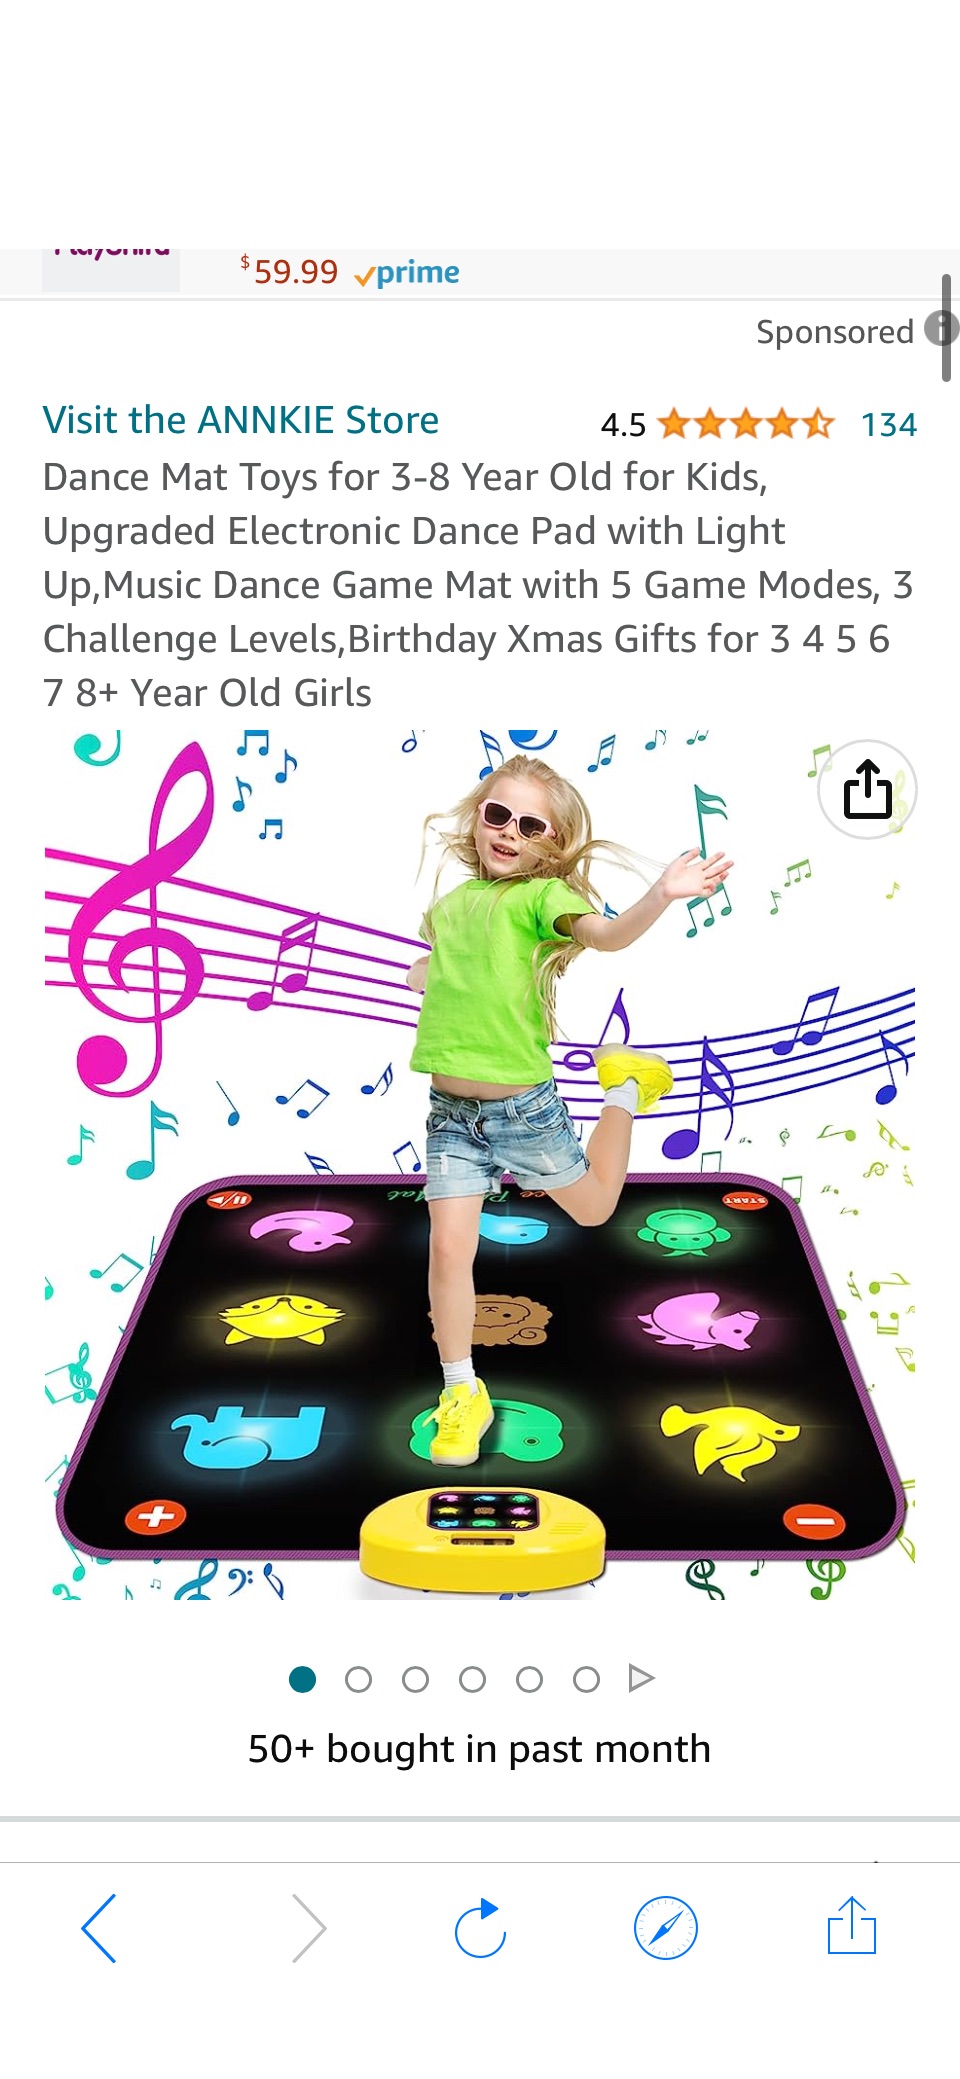 Amazon.com: Dance Mat Toys for 3-8 Year Old for Kids, Upgraded Electronic Dance Pad with Light Up,Music Dance Game Mat with 5 Game Modes, 原价69.99